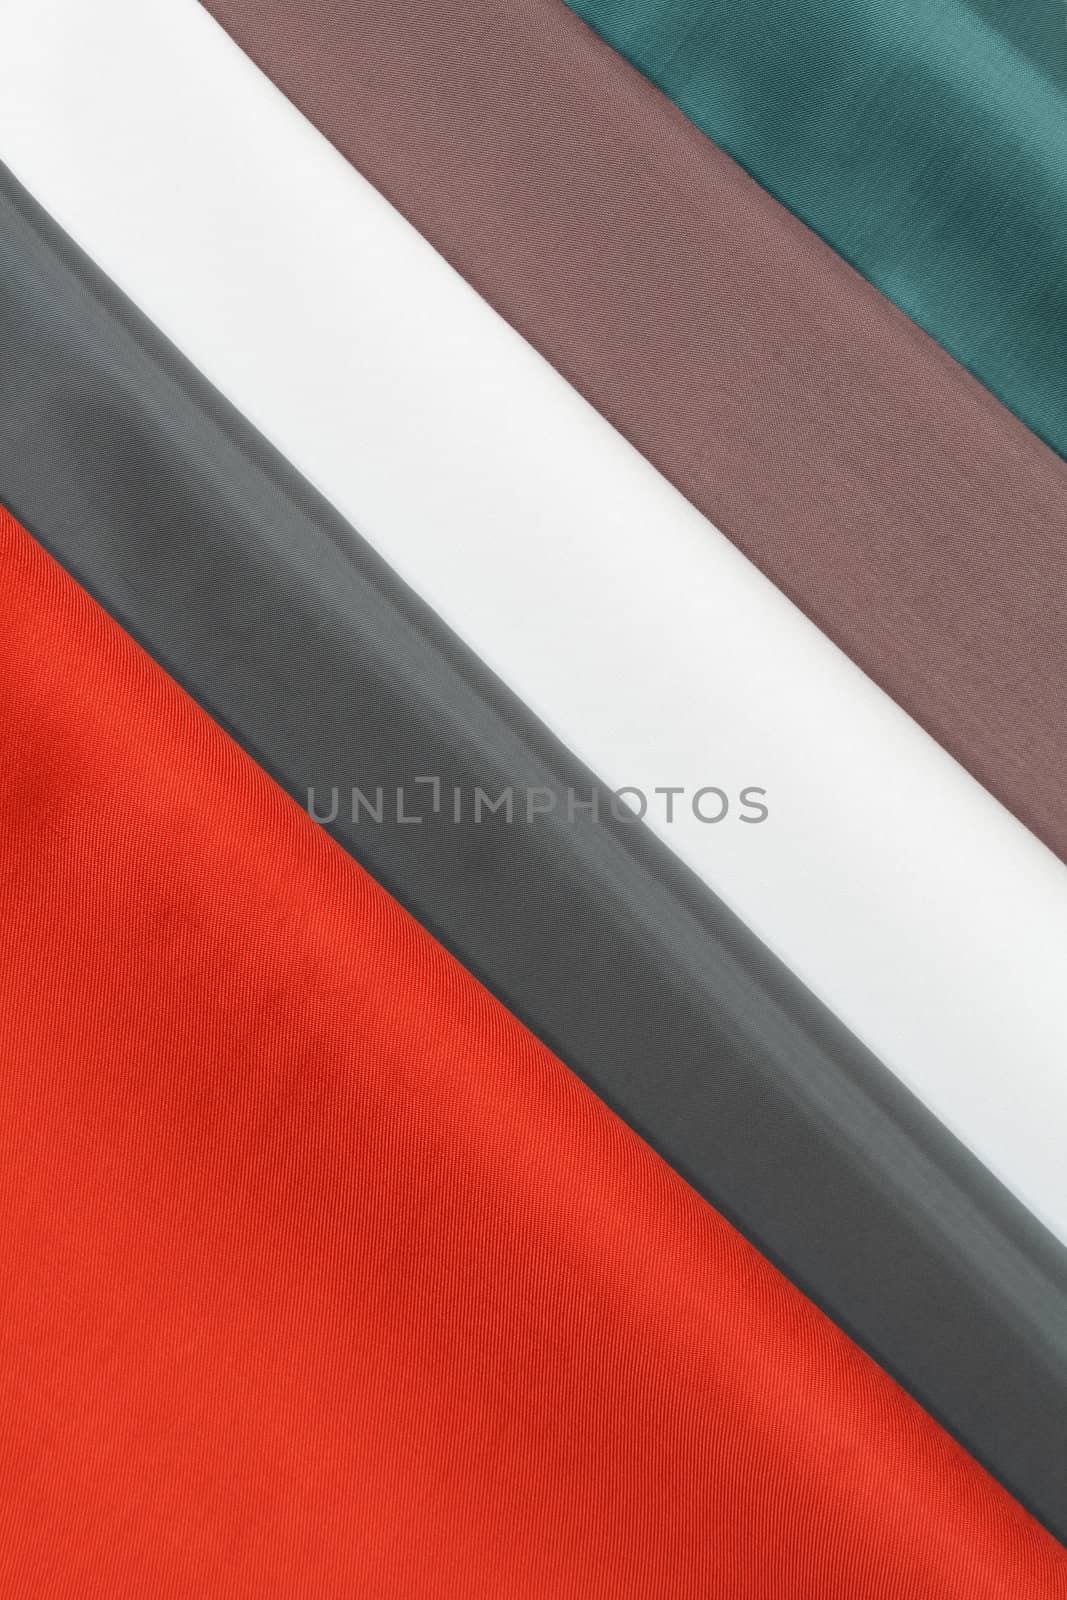 Background made from stack of various colored cloth